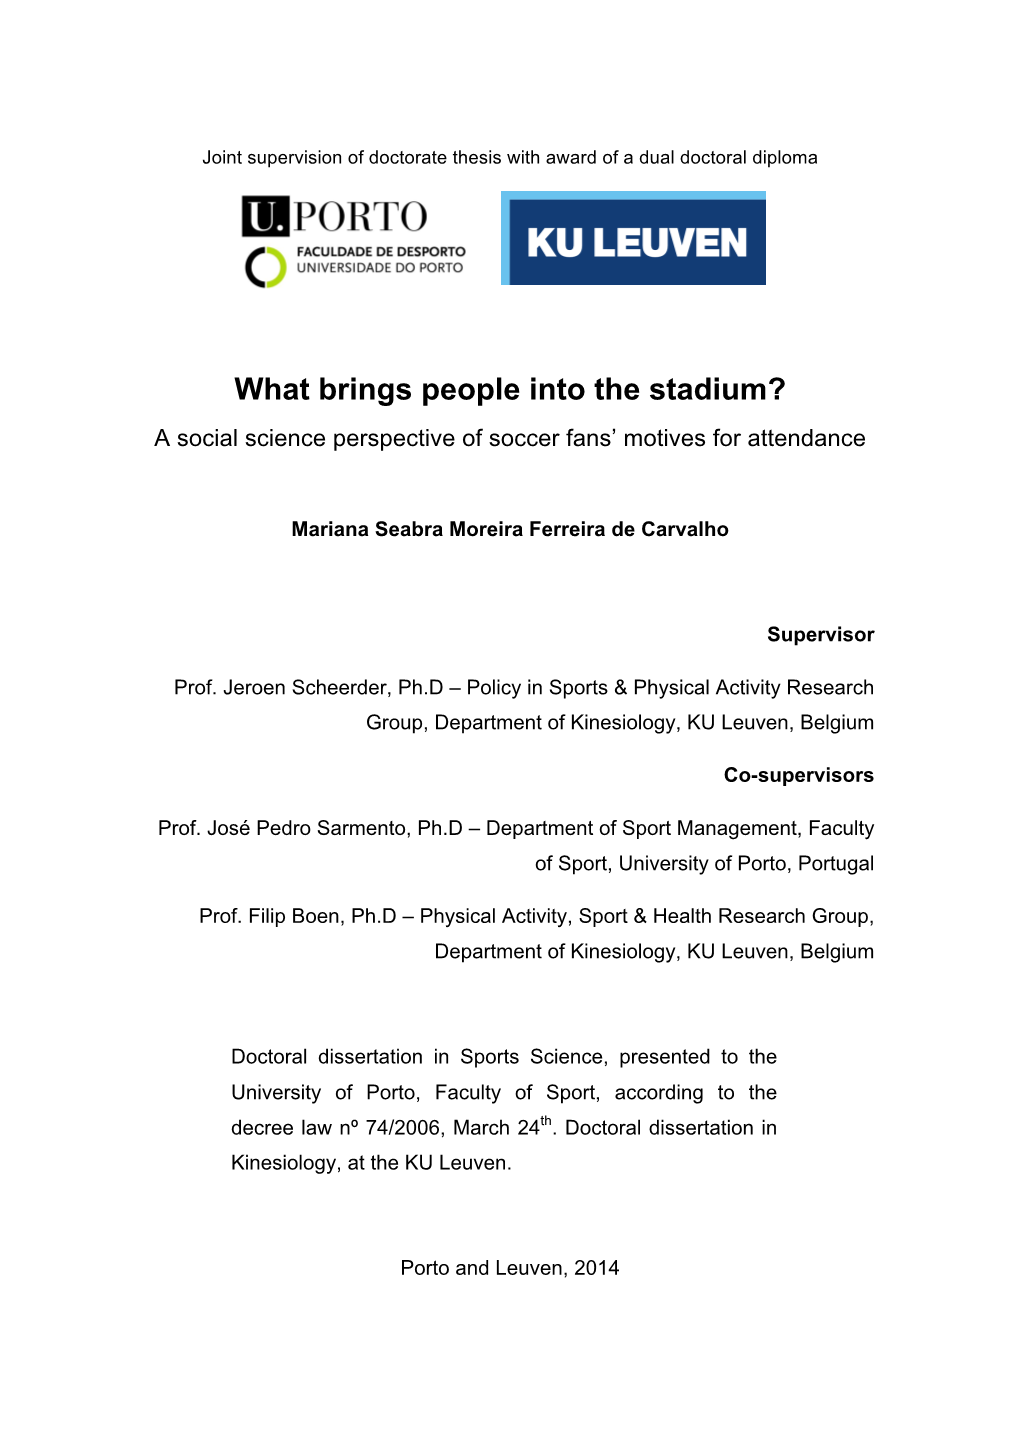 What Brings People Into the Stadium? a Social Science Perspective of Soccer Fans’ Motives for Attendance